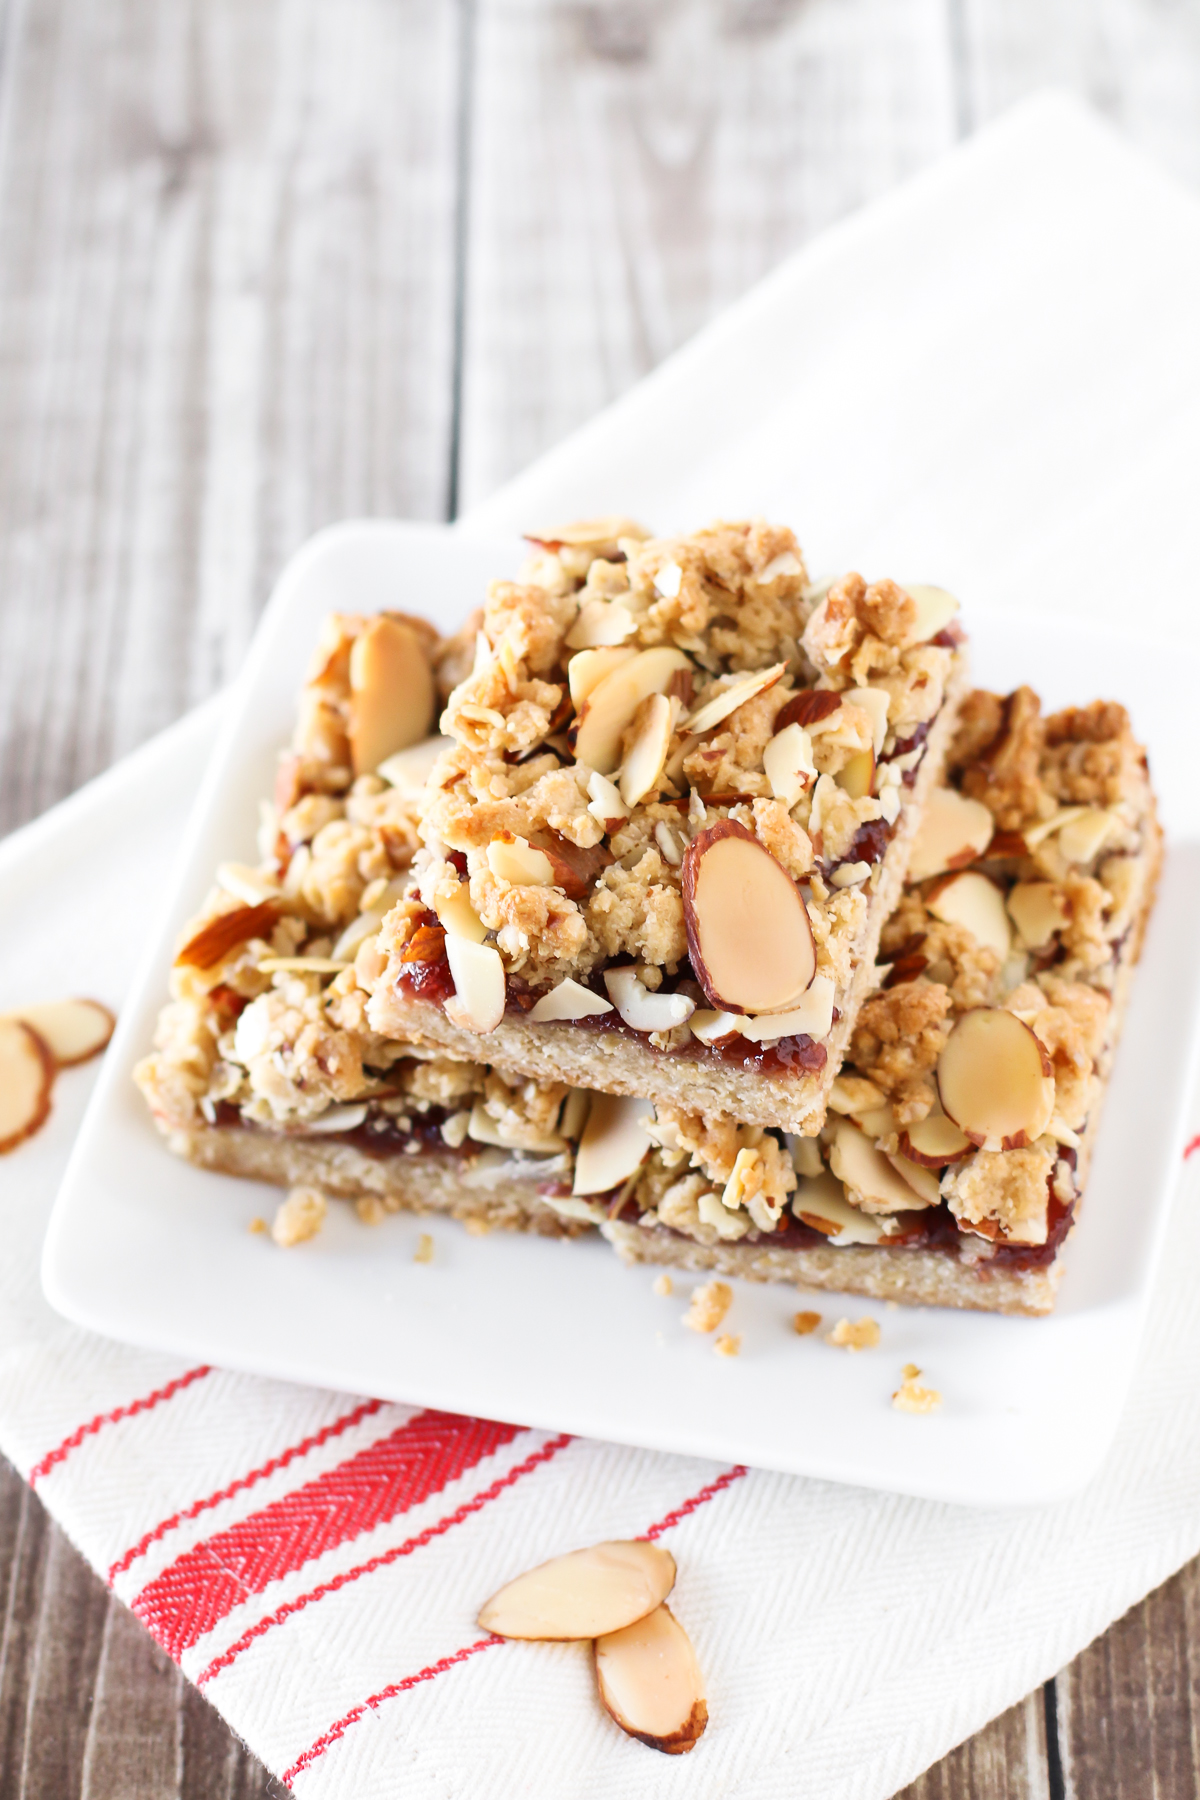 Gluten Free Vegan Raspberry Almond Crumb Bars. Layers of crumb topping, sweet raspberry jam and toasted almonds. The perfect bite!